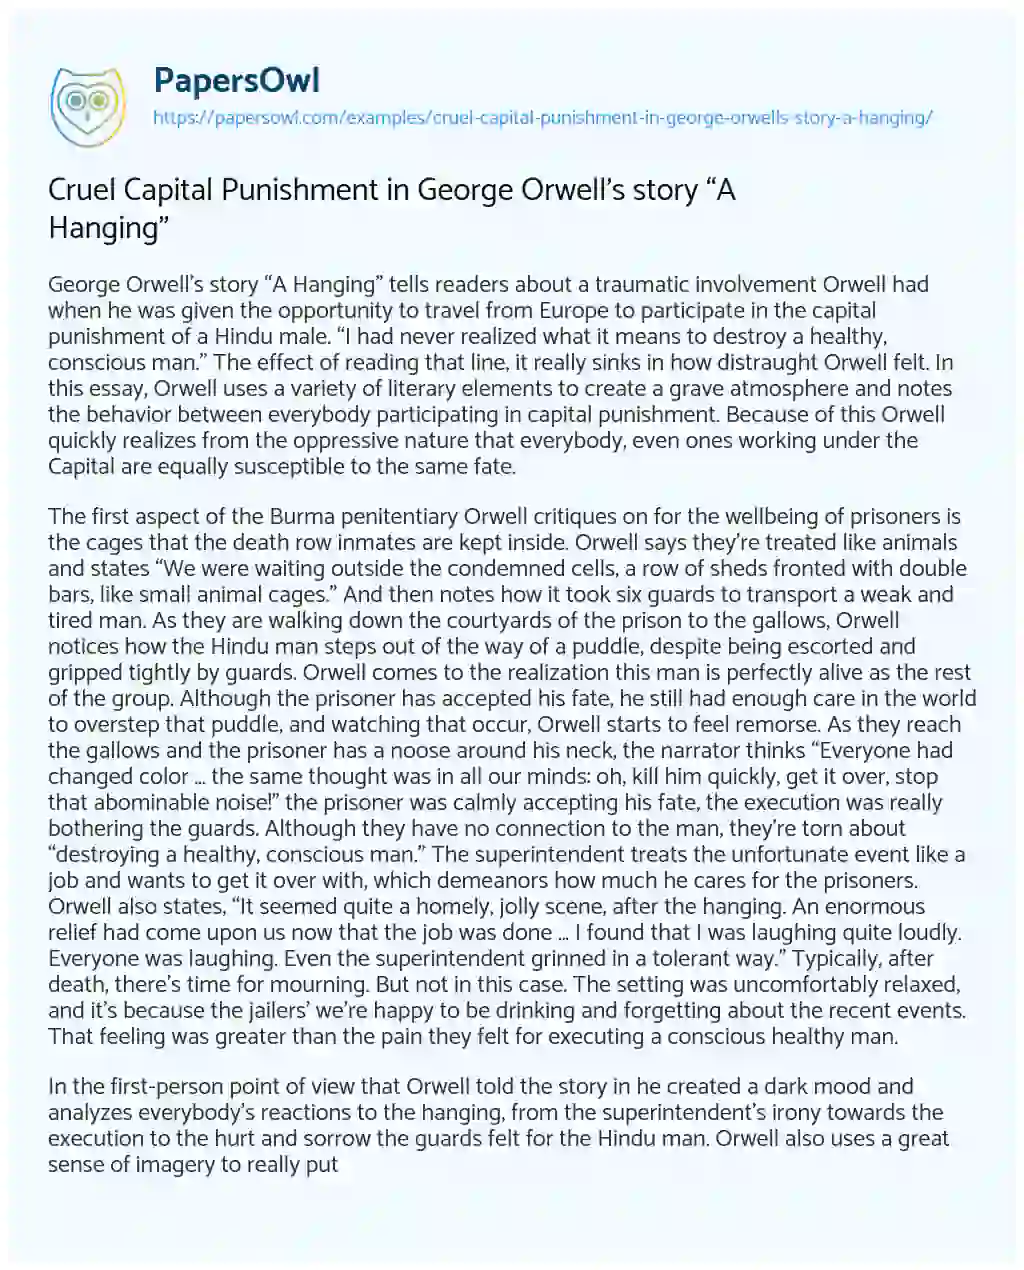 Essay on Cruel Capital Punishment in George Orwell’s Story “A Hanging”